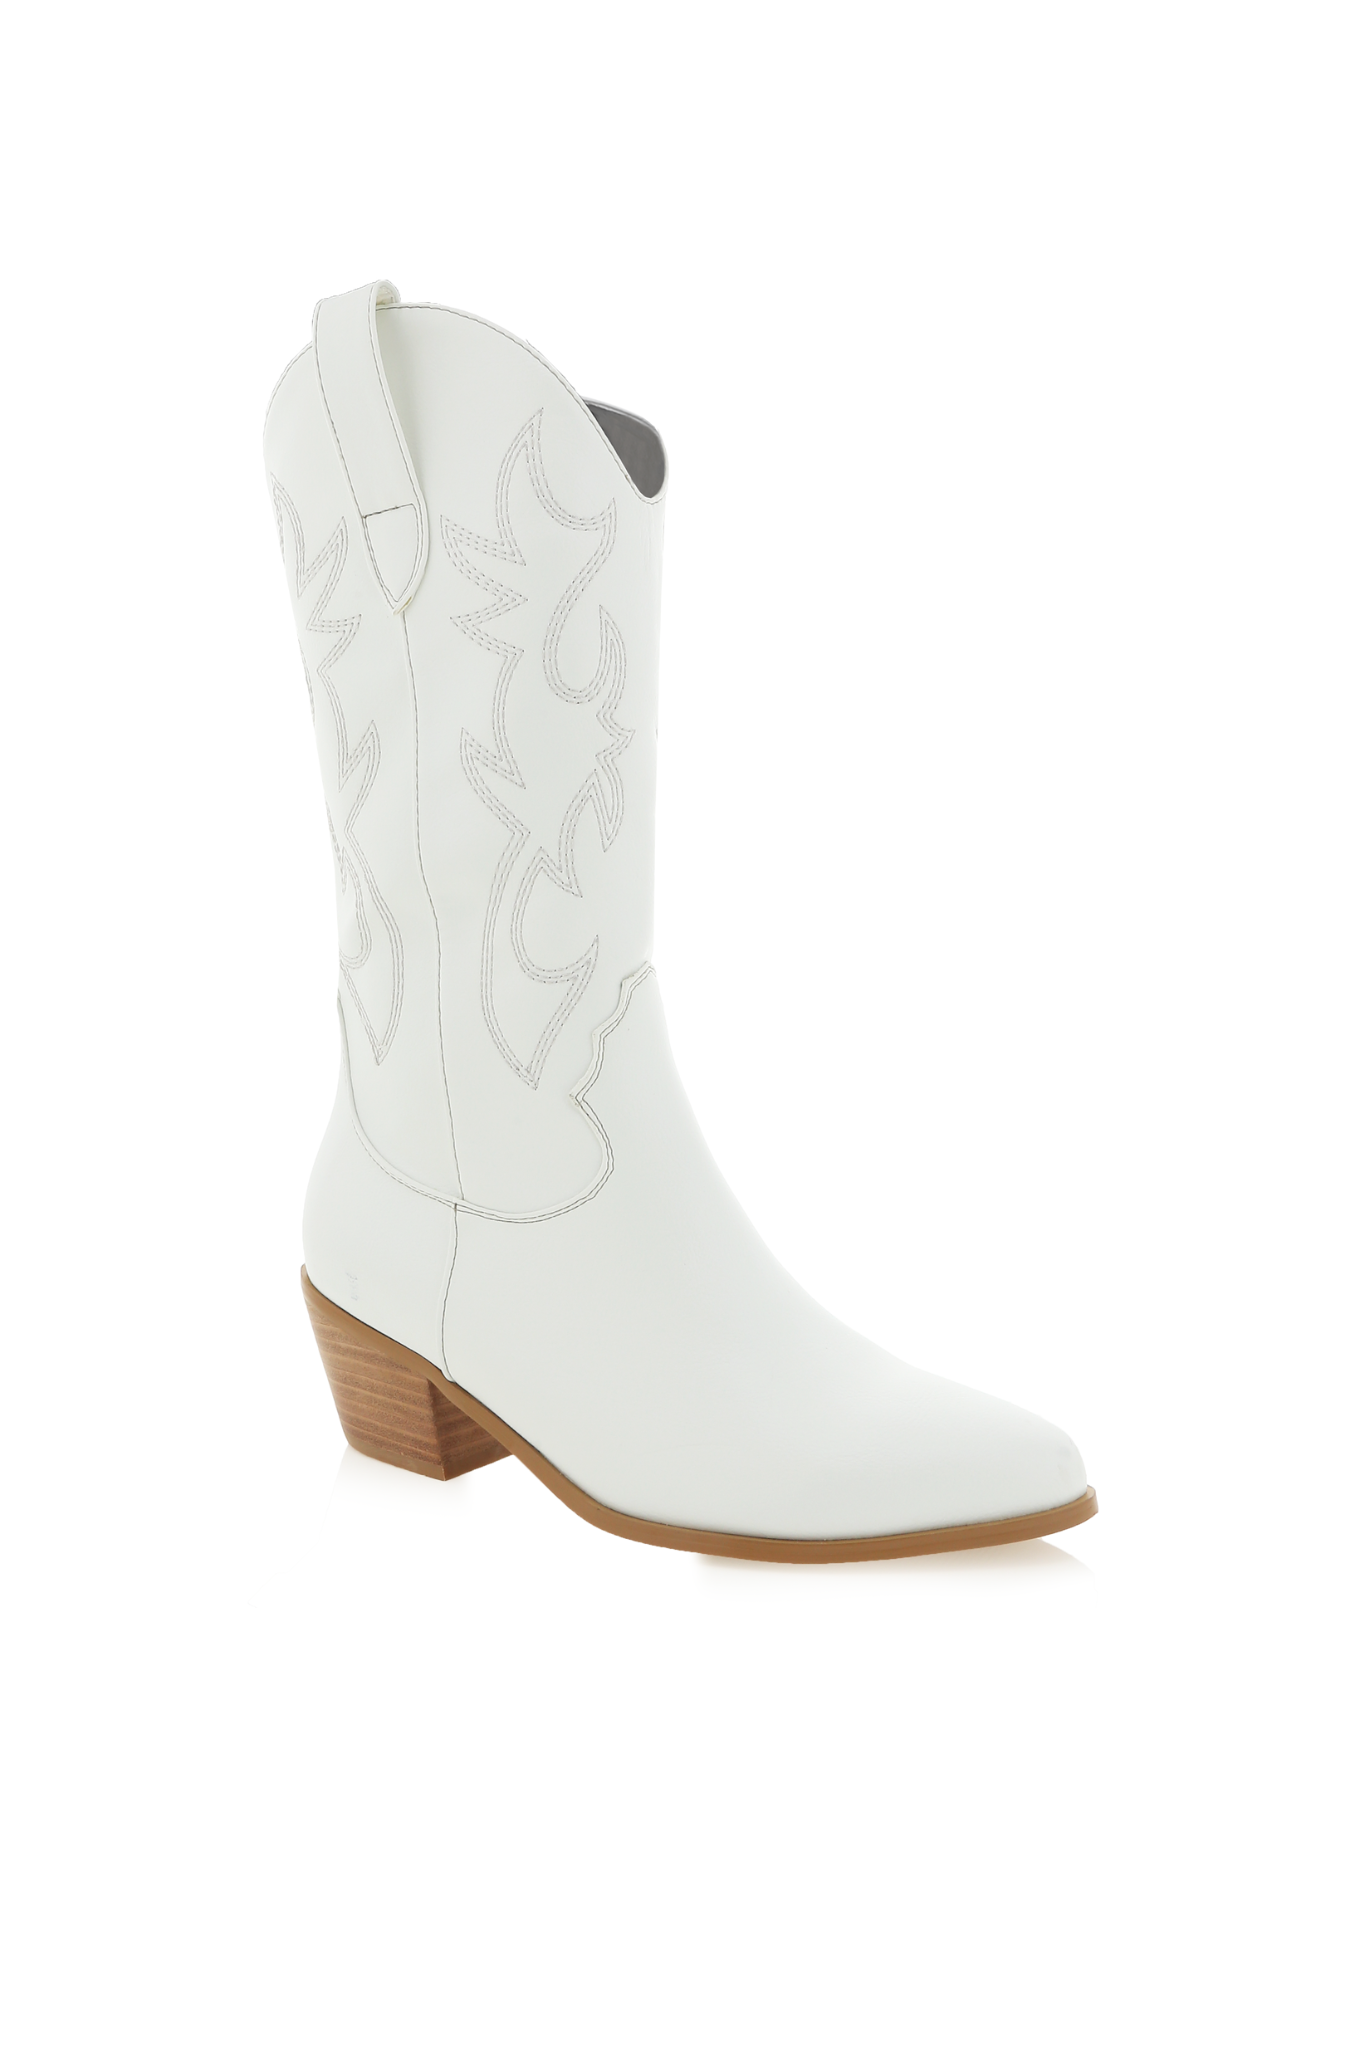 View 1 of Billini Dixie Boot, a Shoes from Larrea Cove. Detail: 
Dixie by Billini is a mid height, w...